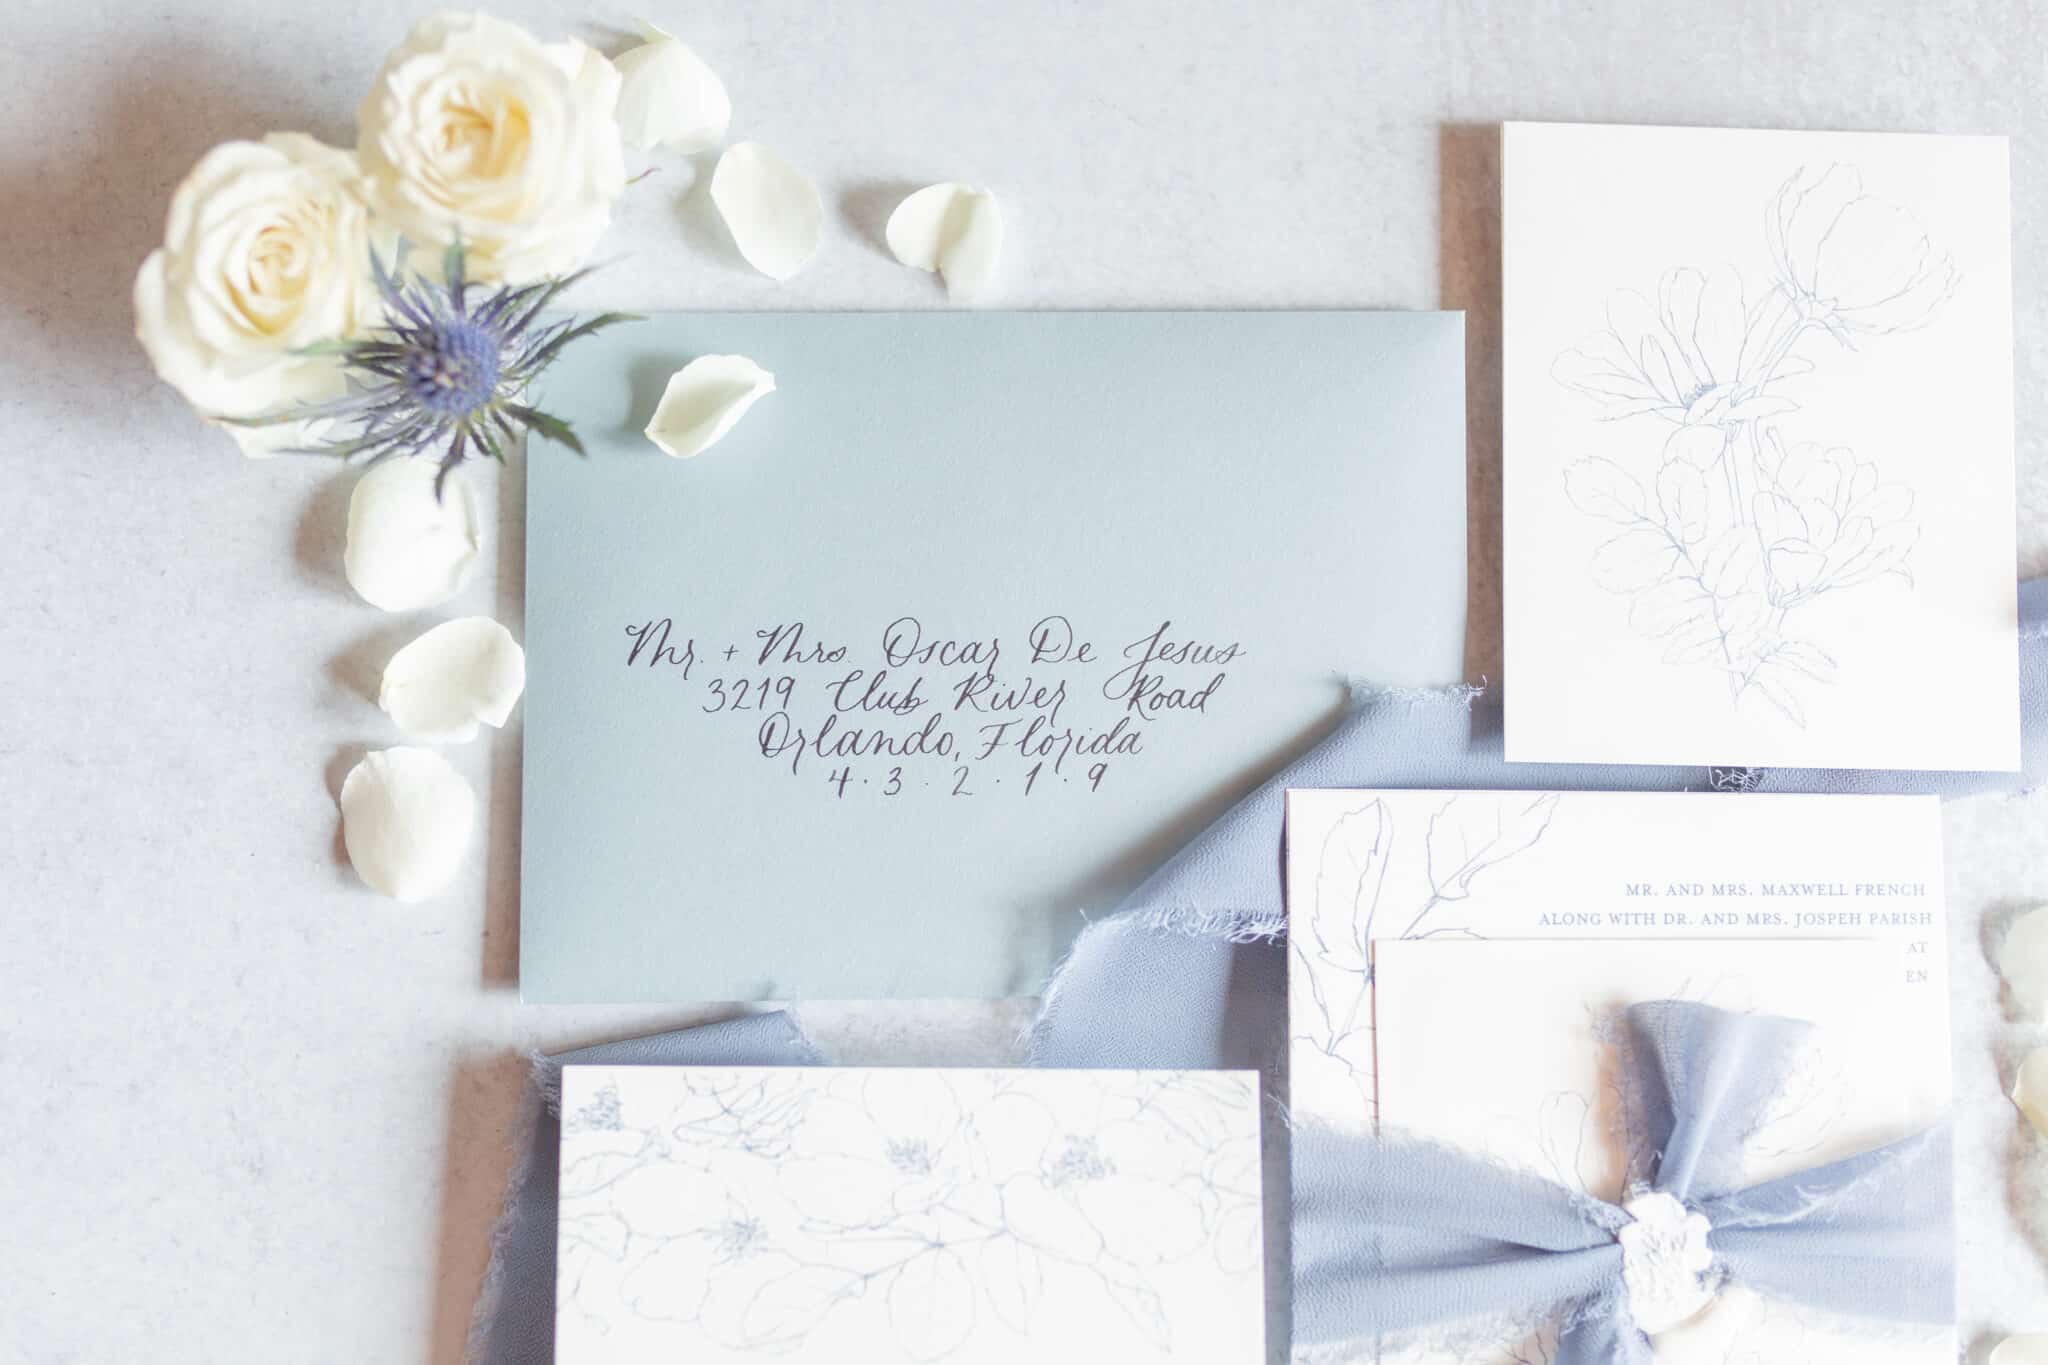 close up of invitation envelope with name written in cursive and flower petals scattered beside it